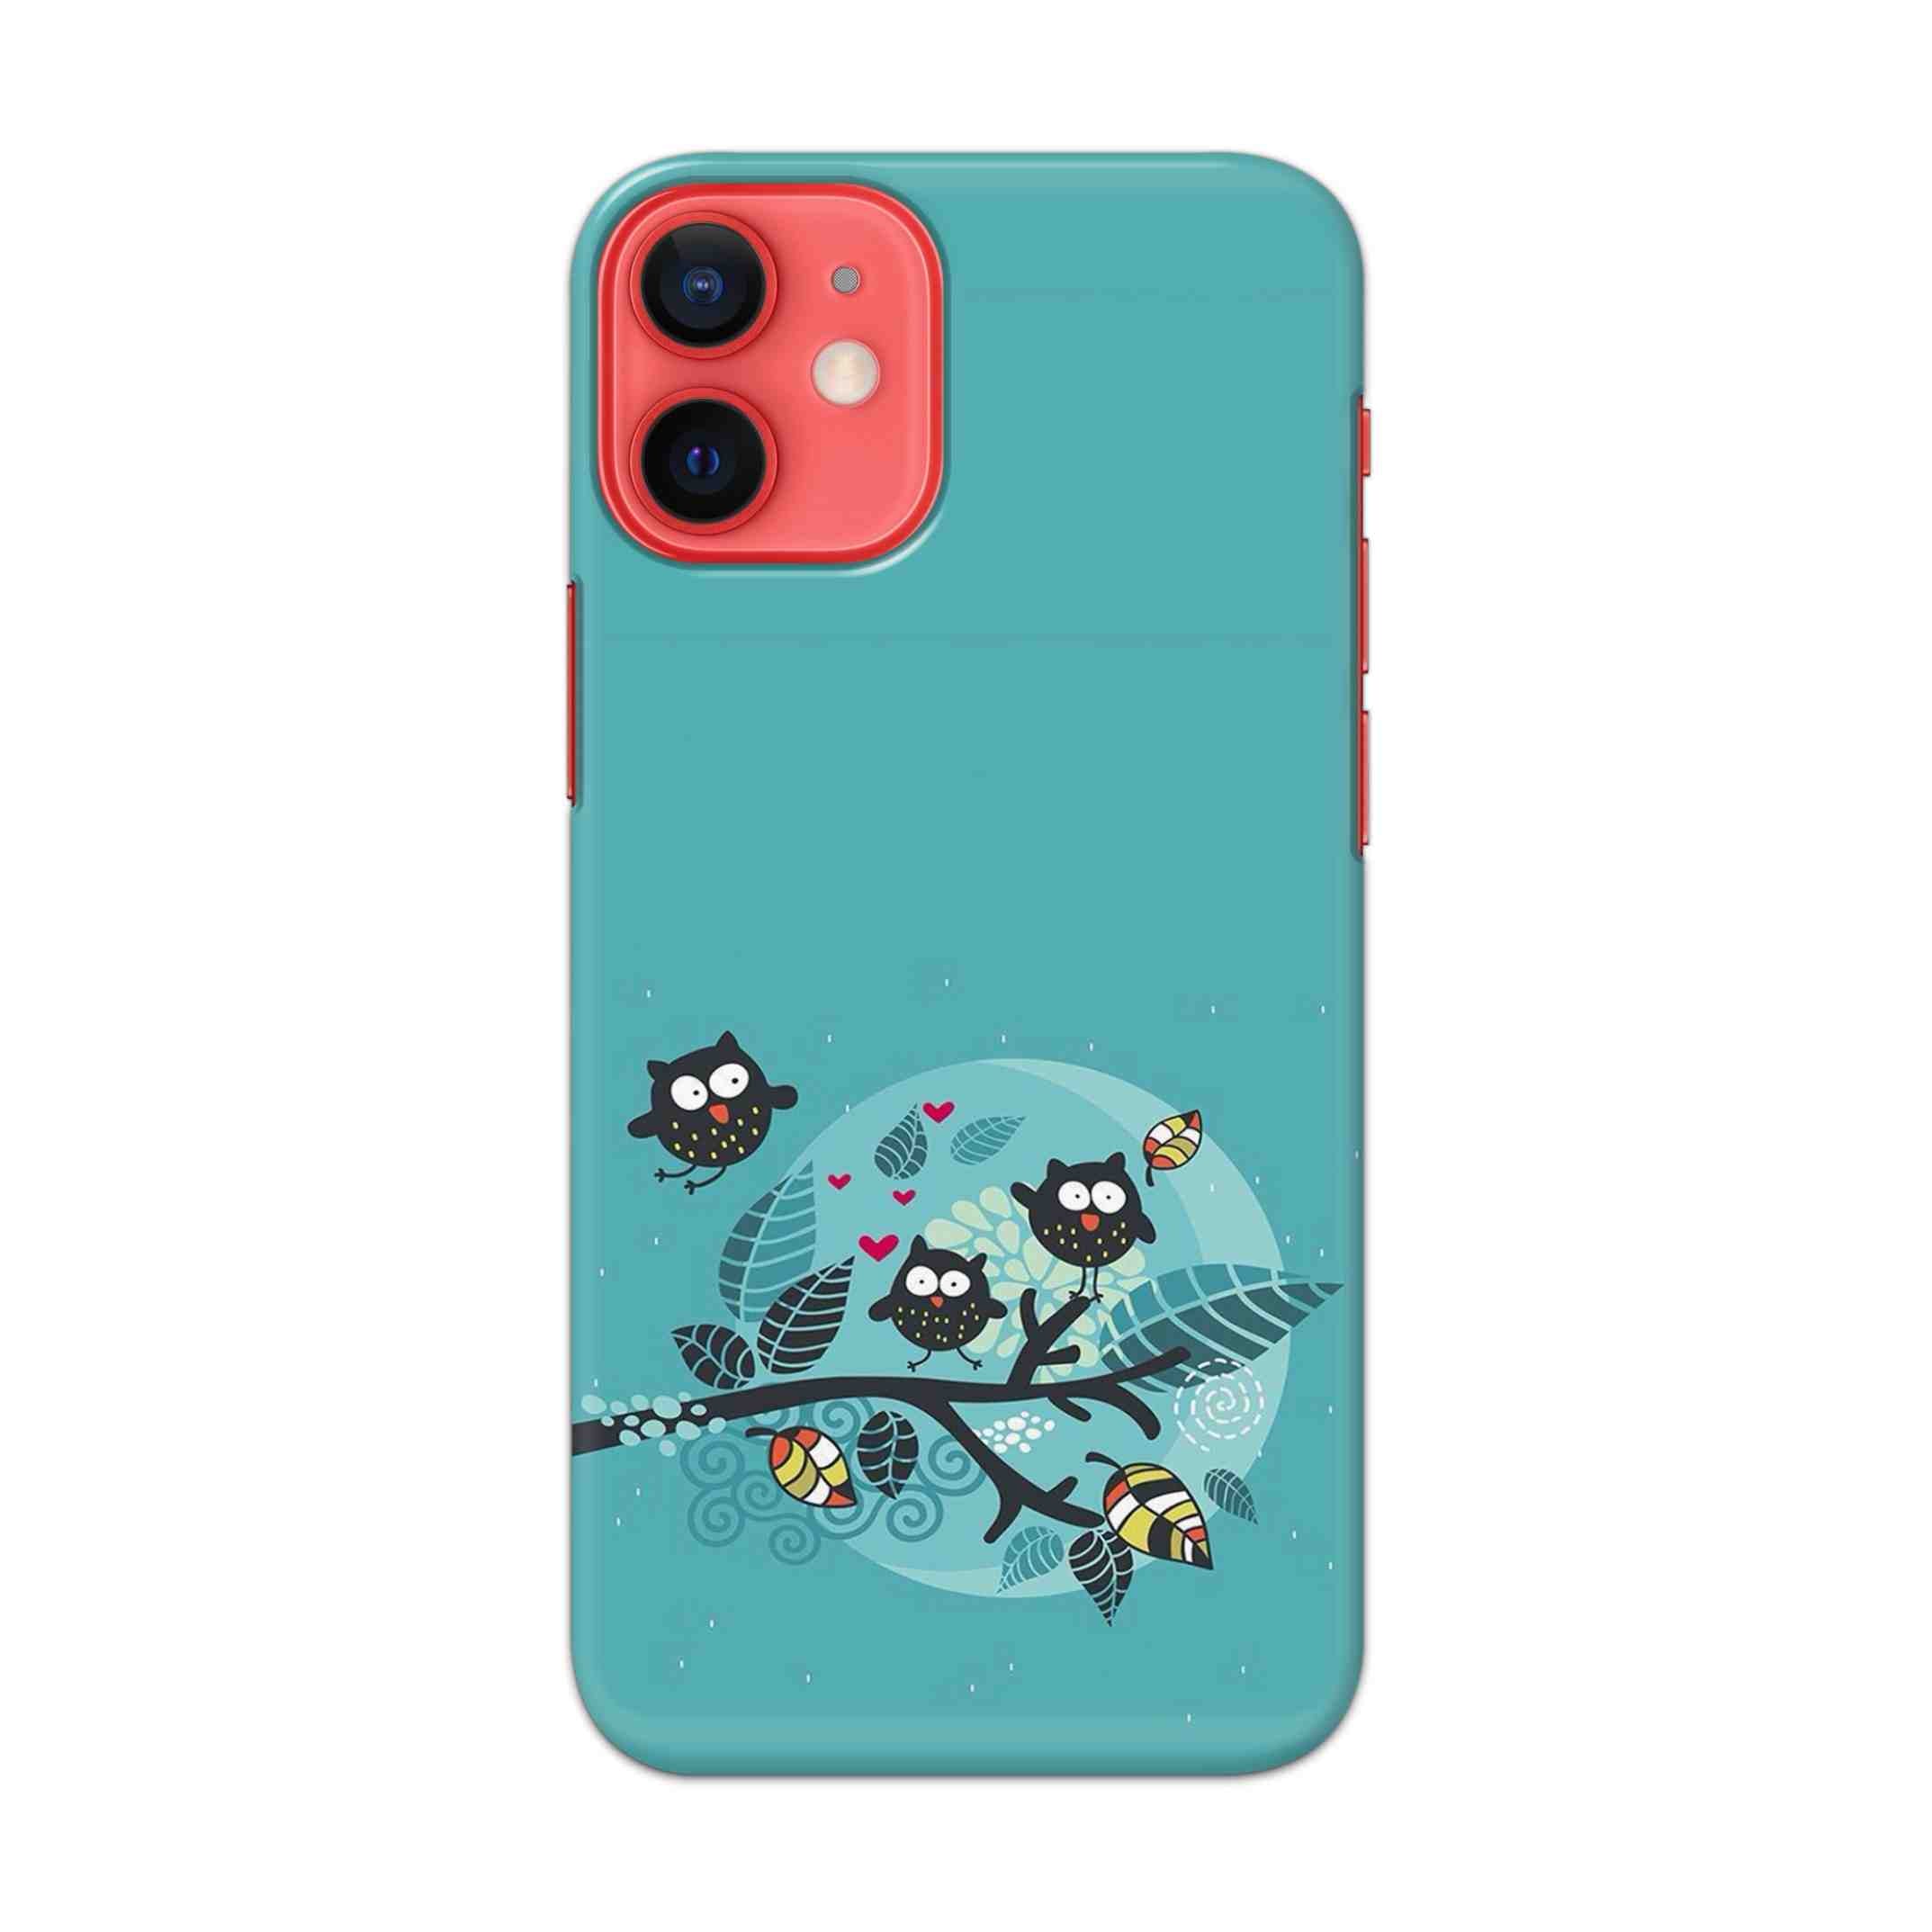 Buy Owl Hard Back Mobile Phone Case/Cover For Apple iPhone 12 mini Online